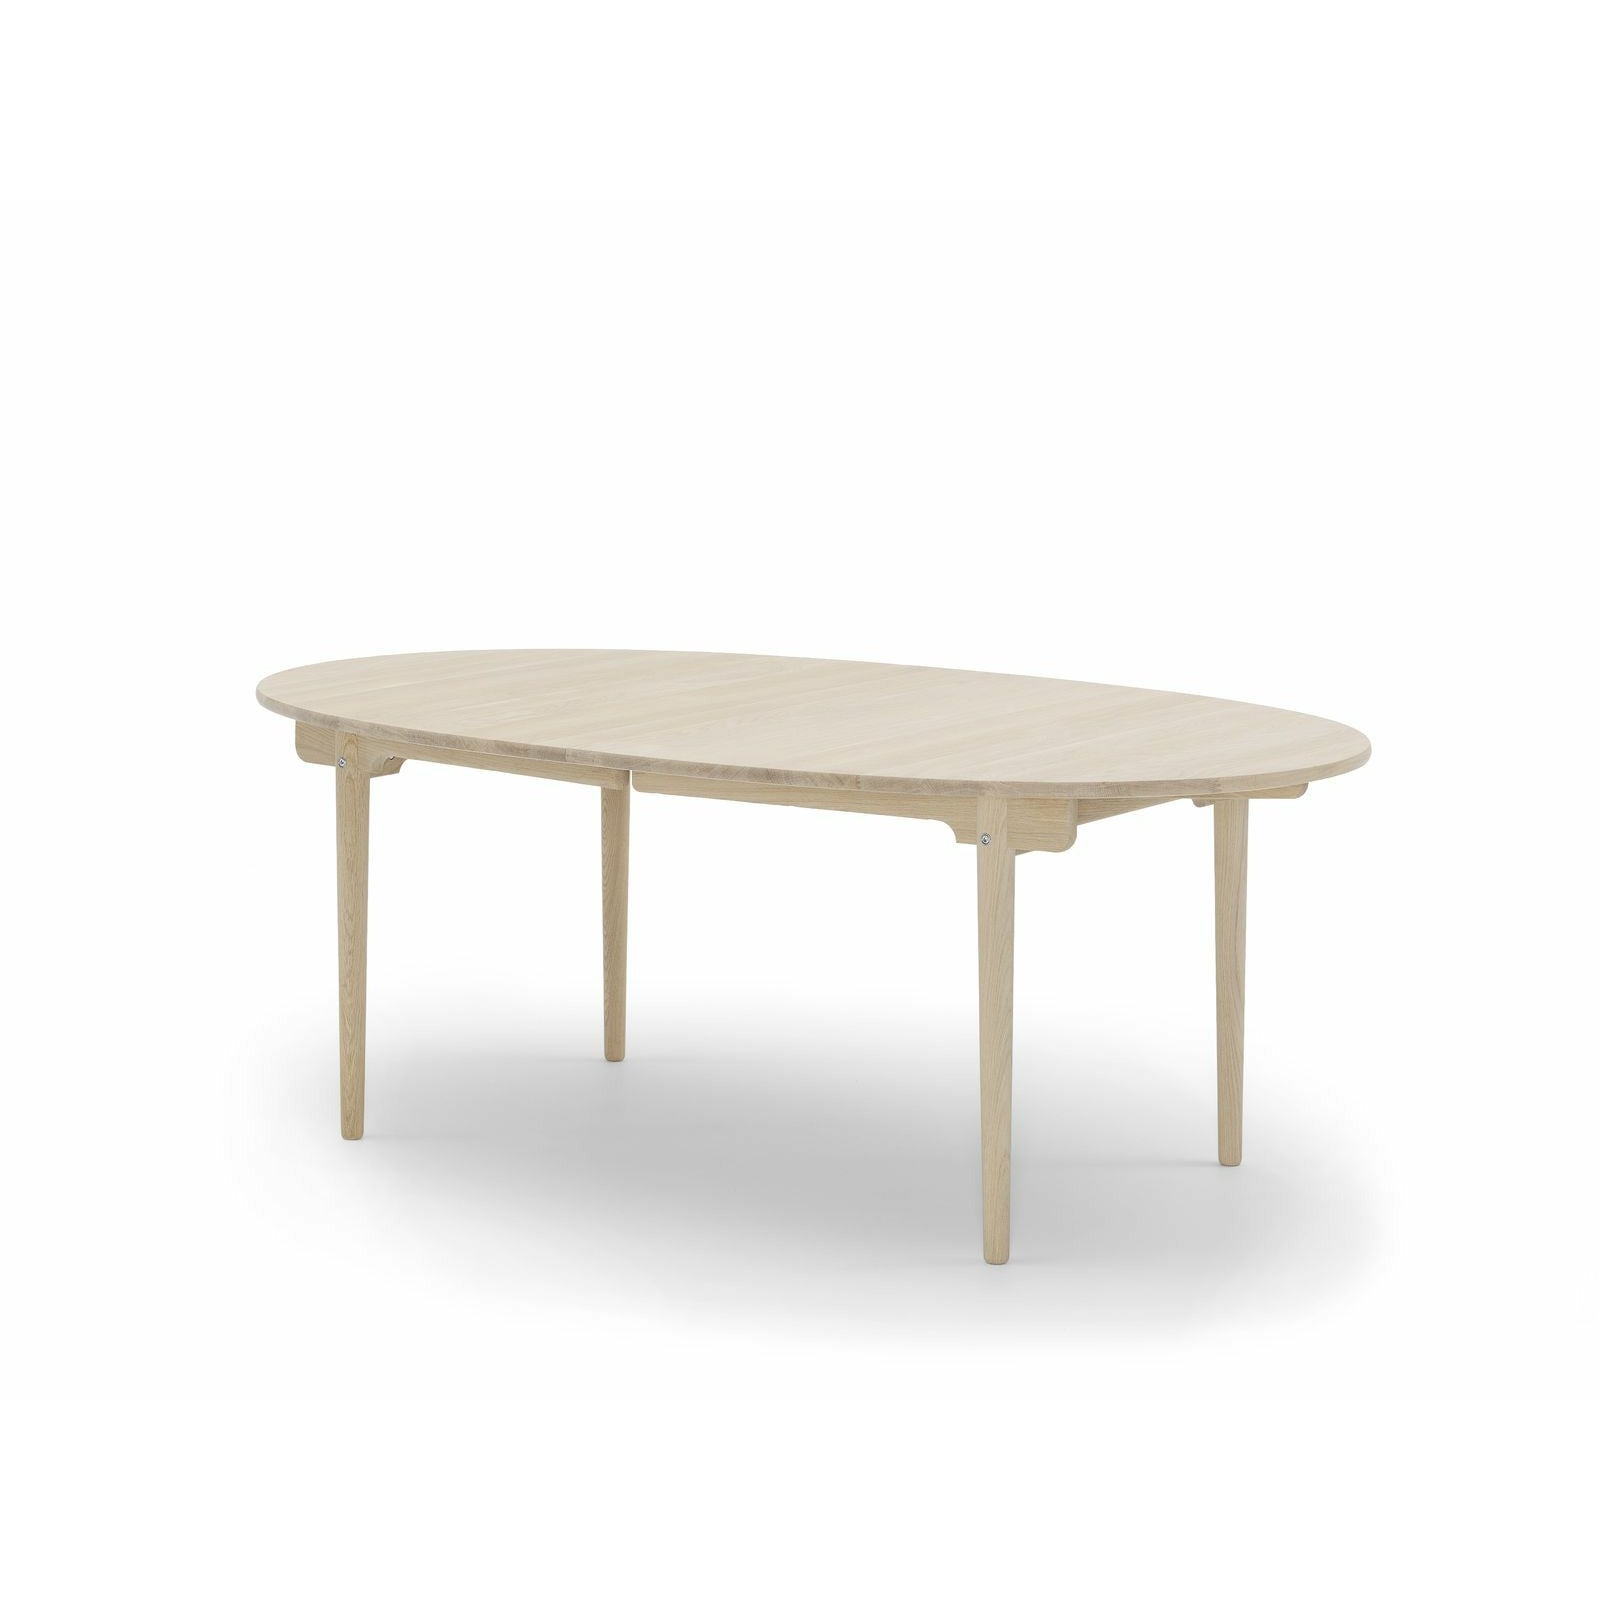 Carl Hansen Ch338 Dining Table Incl. 2 Additional Plates, White Oiled Oak